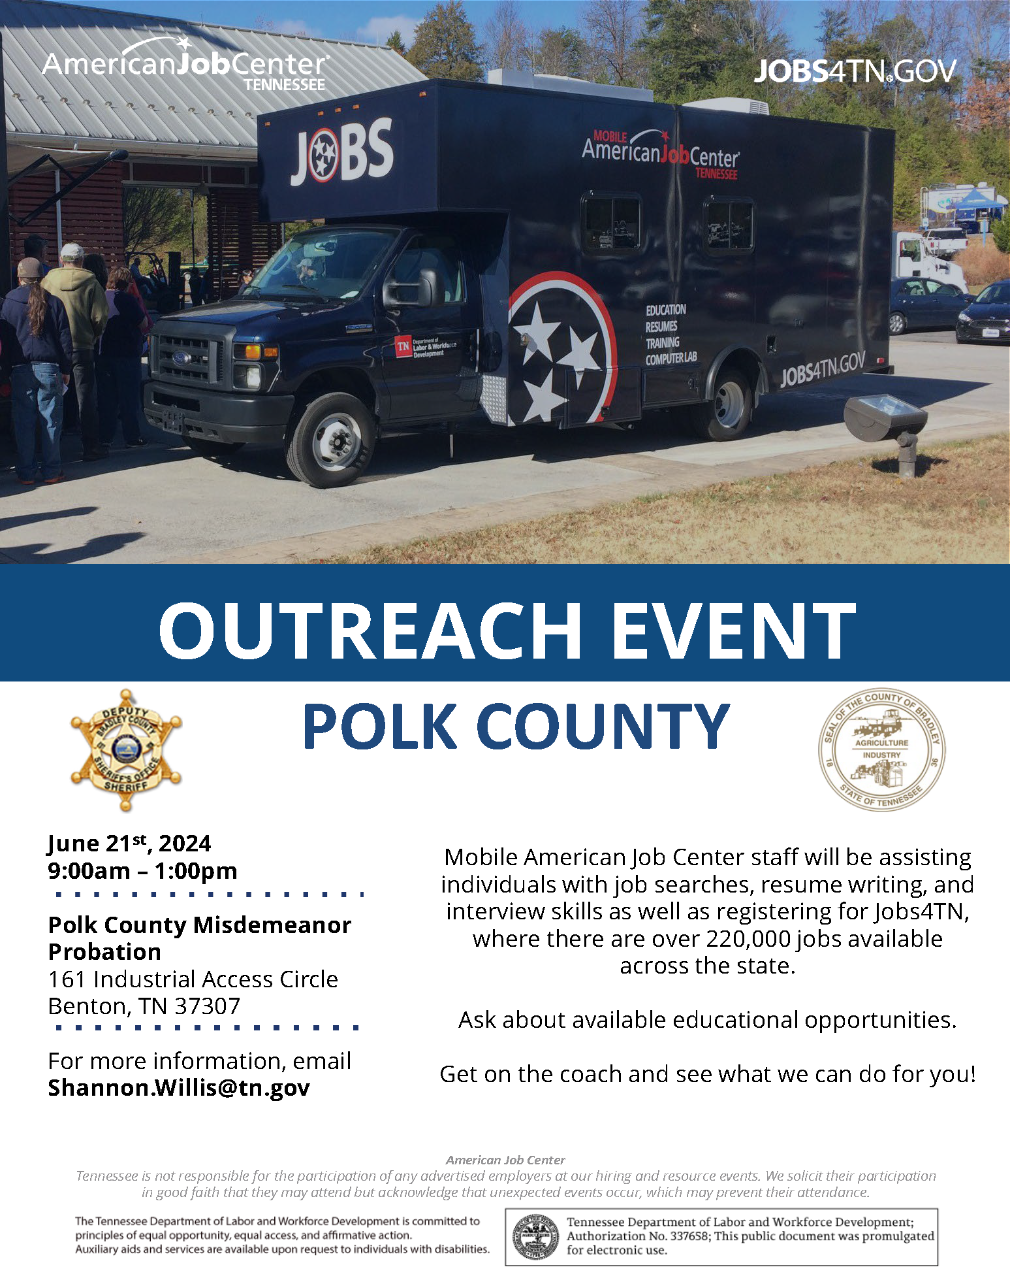 The Outreach Event in Polk County is June 21, 2024